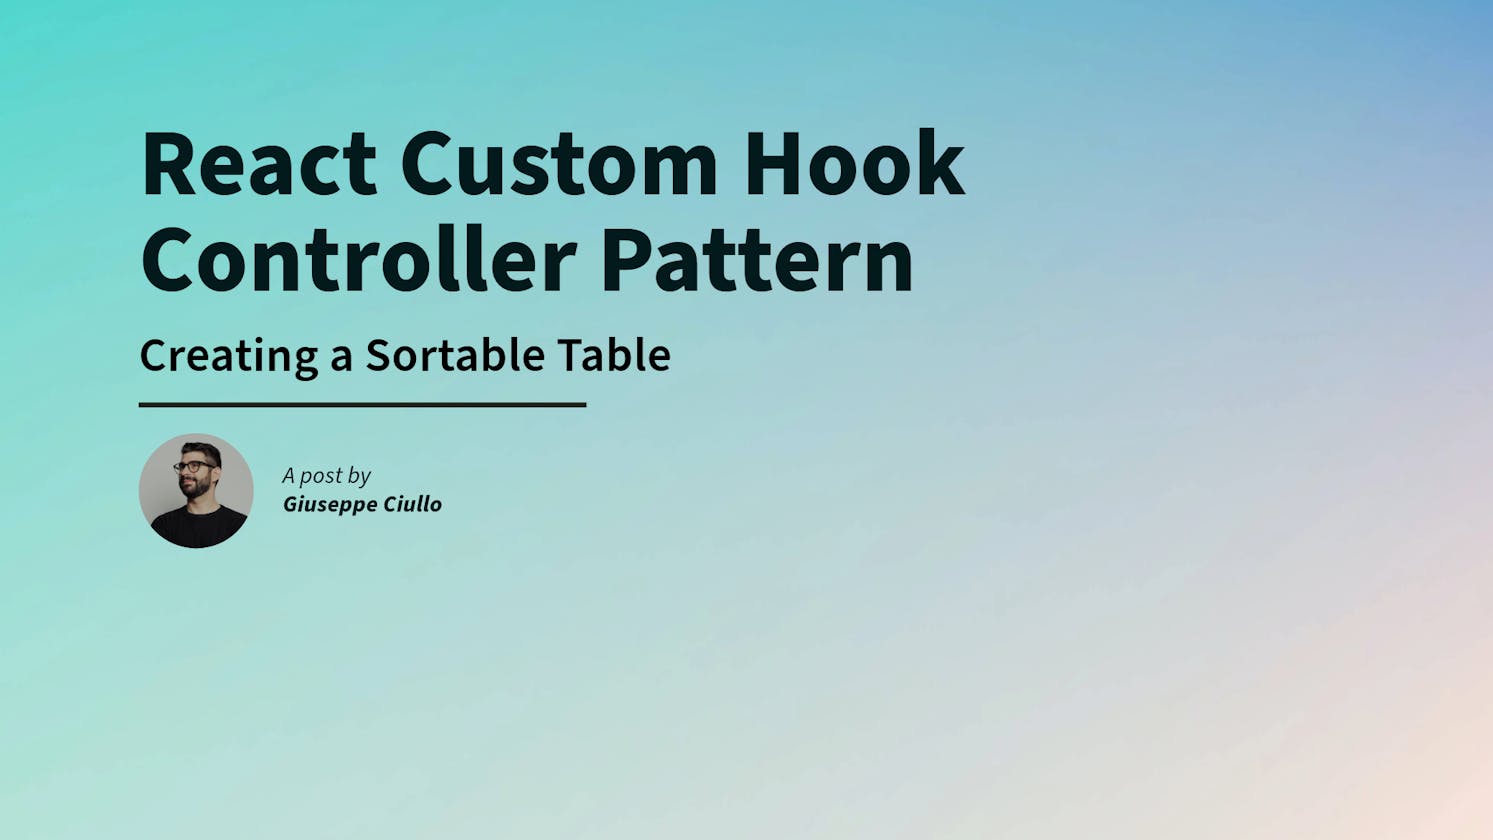 React Custom Hook Controller Pattern: Creating a Sortable Table